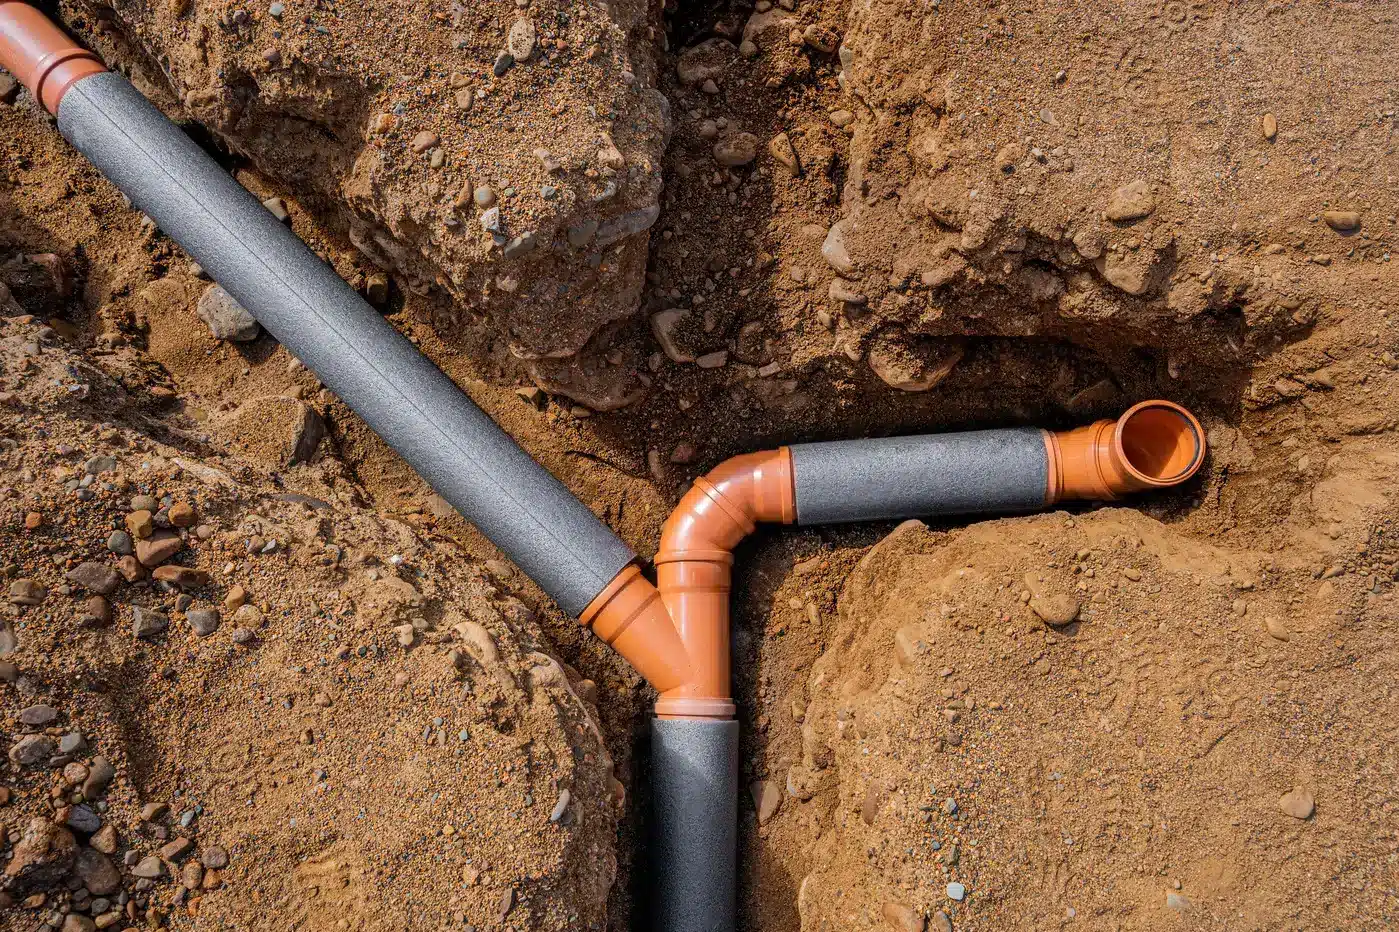 Sewer pipes are expensive to replace due to excavating and cost of labor and more.